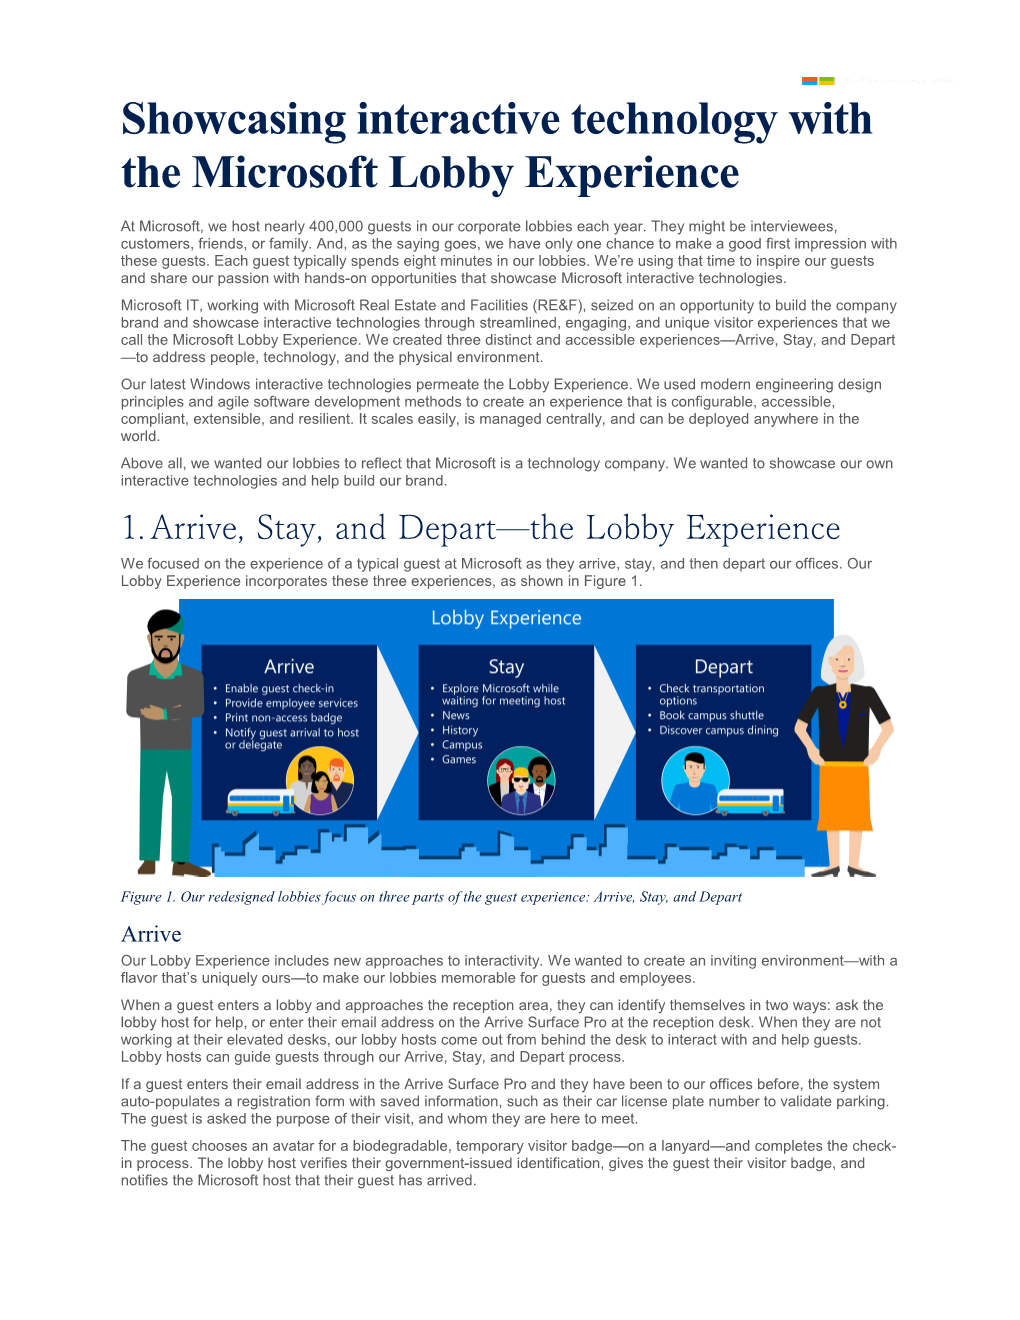 Showcasing Interactive Technology with the Microsoft Lobby Experience